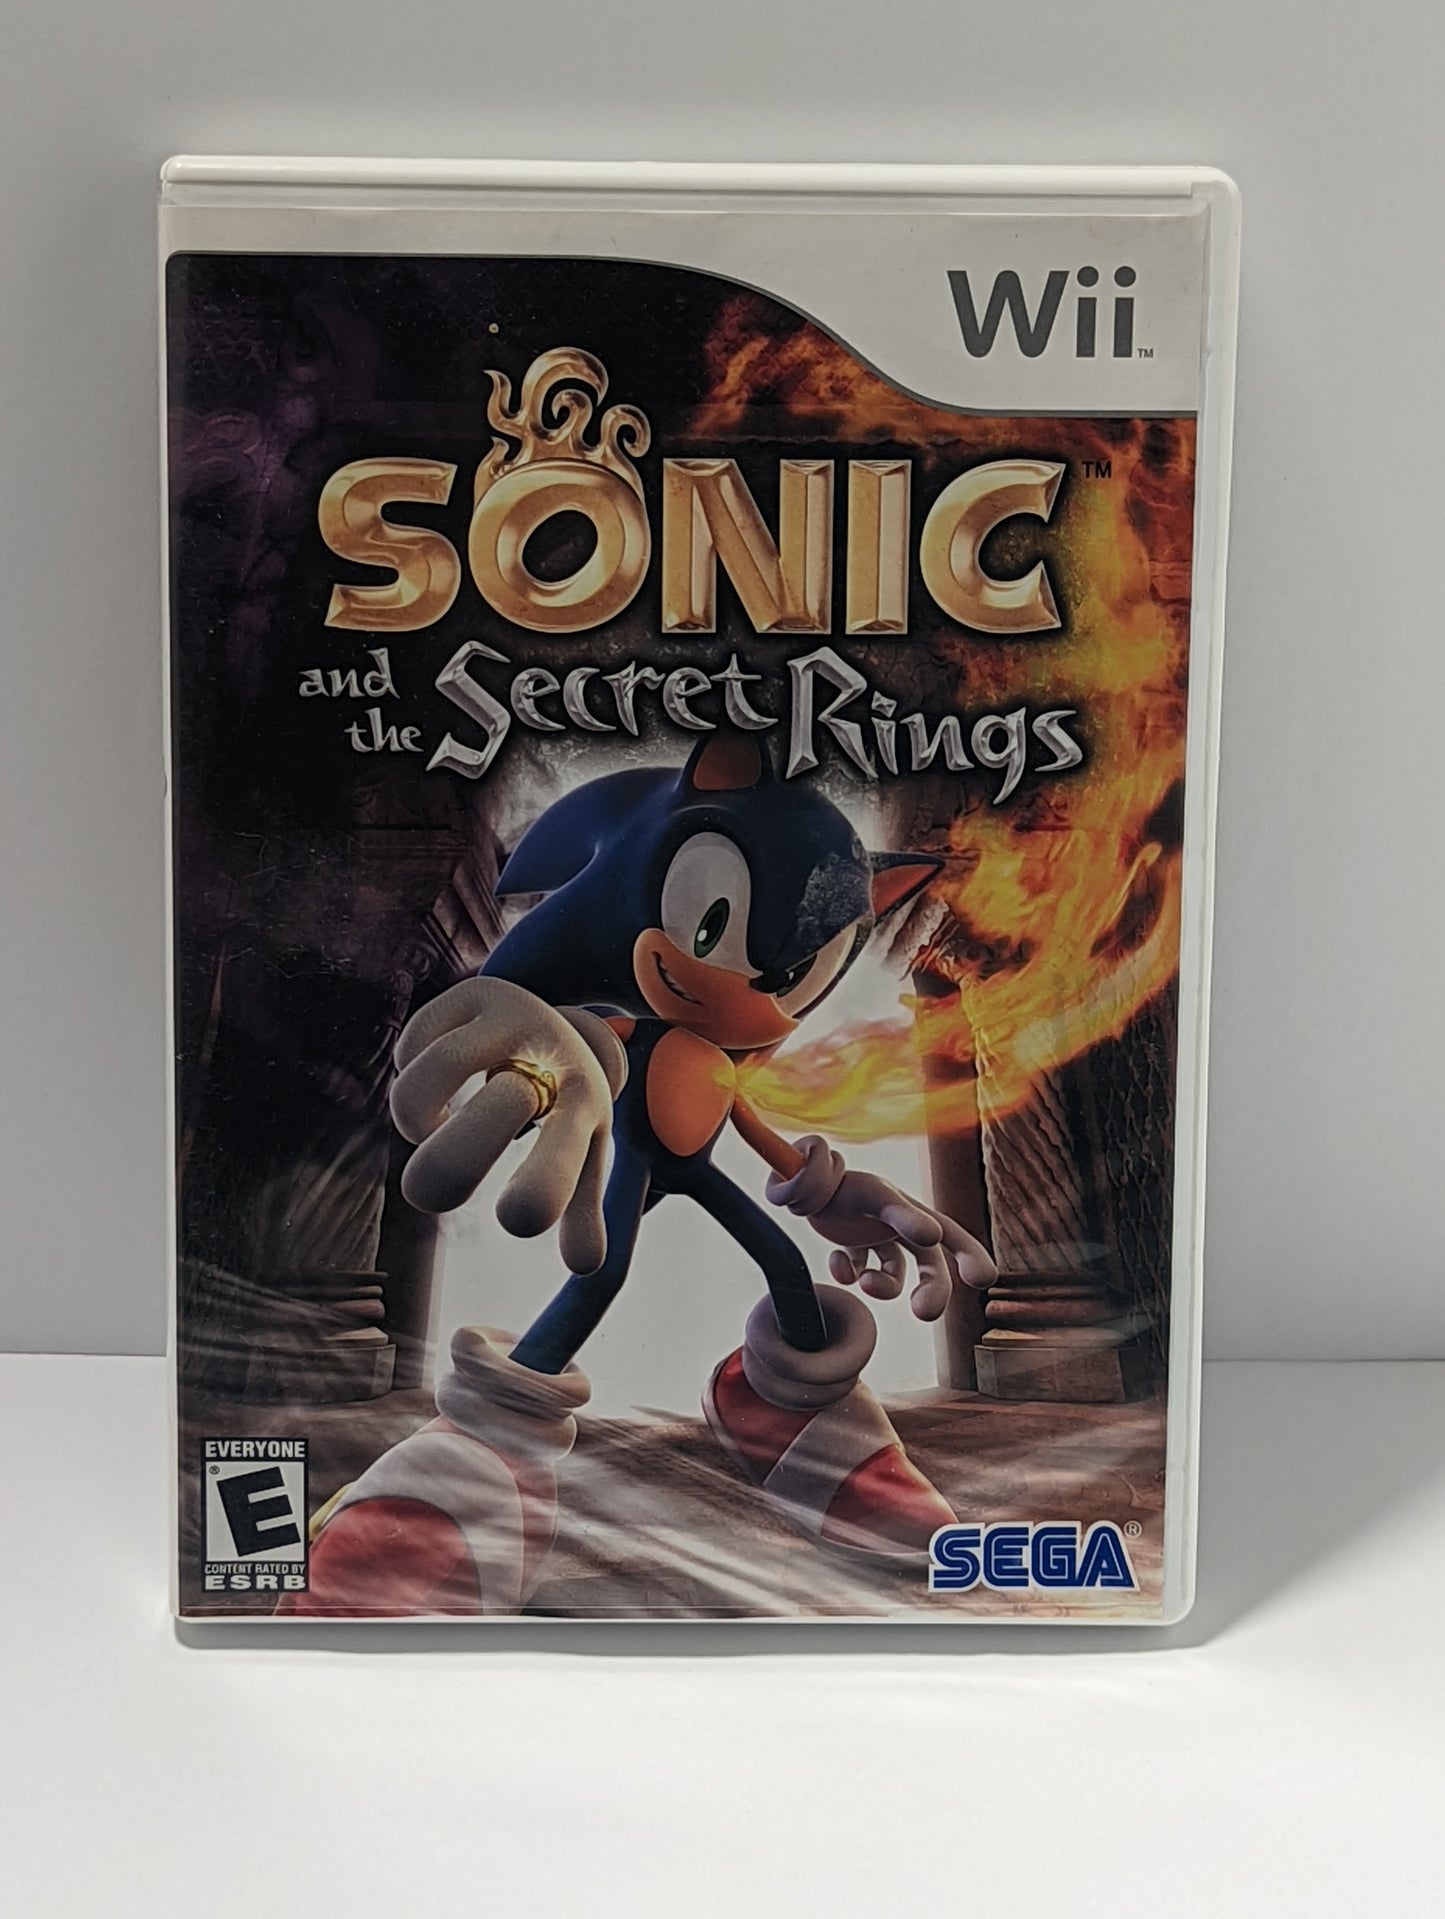 Wii Sonic and the Secret Rings game